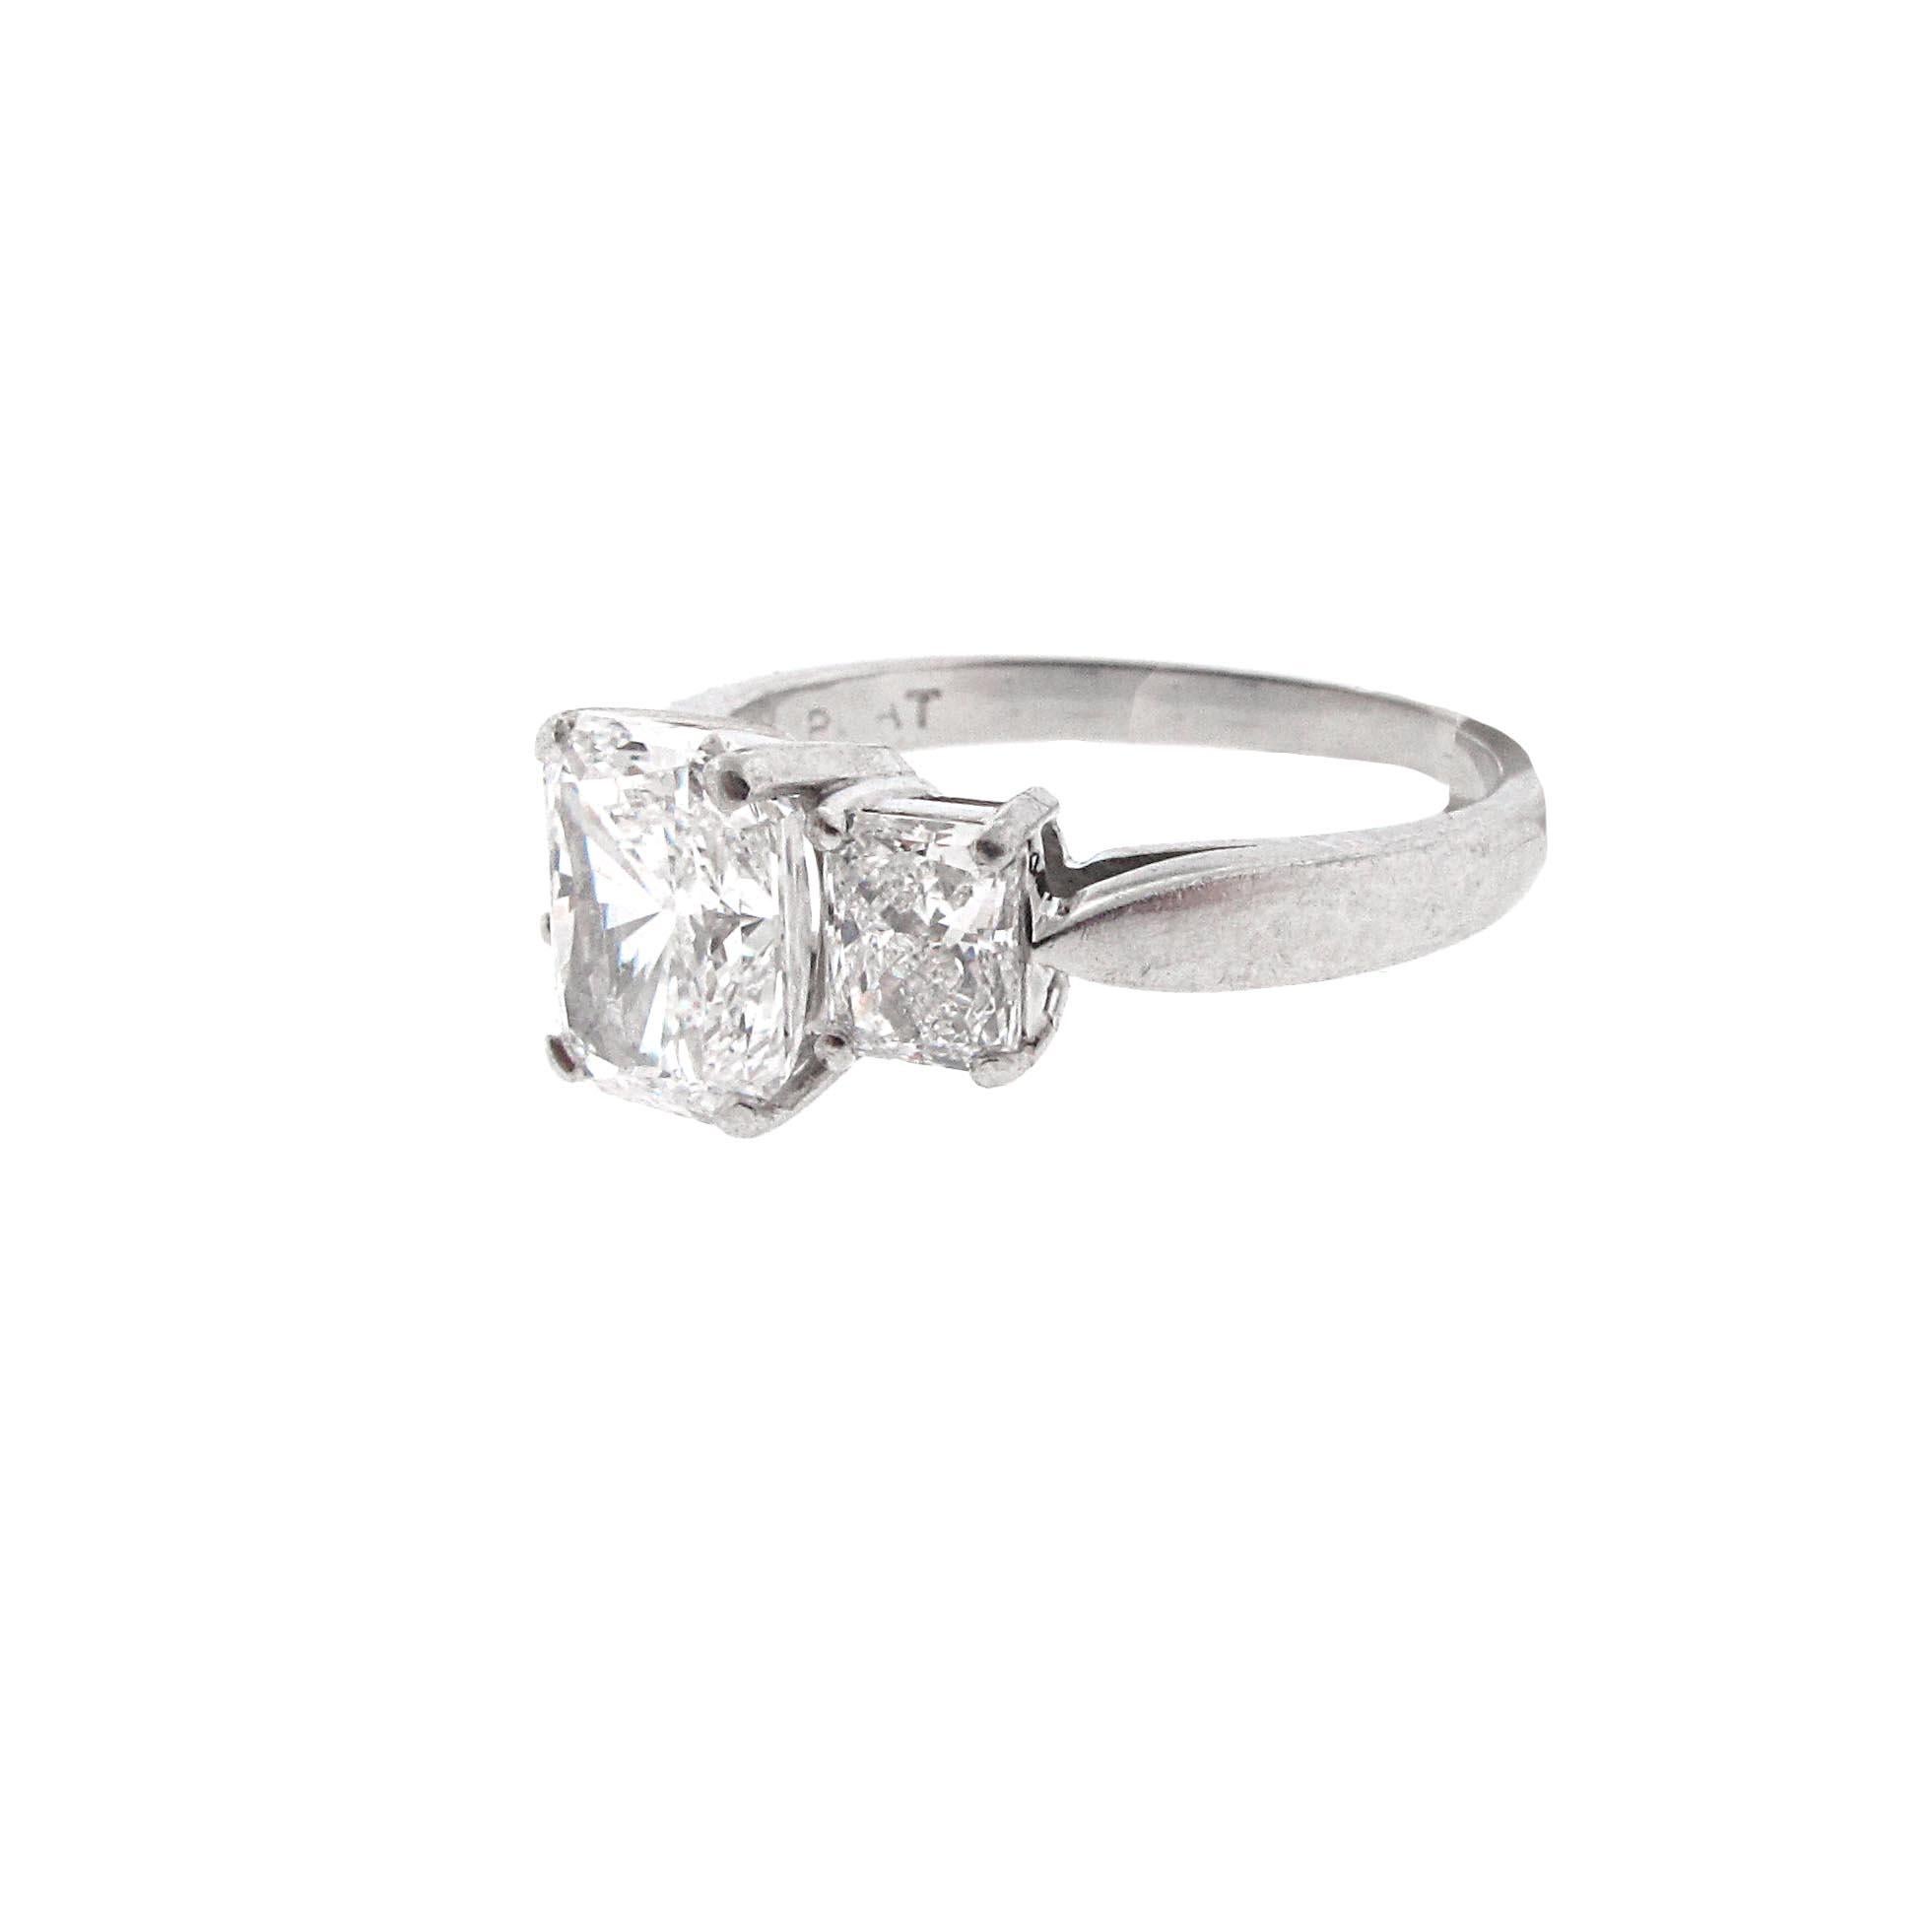 This is a GORGEOUS GIA Certified, 1.53 carat E-Si1 radiant diamond, three-stone engagement ring with side stones. This diamond is super white and of extremely high quality. This is the second whitest color diamond available. The stone is set between